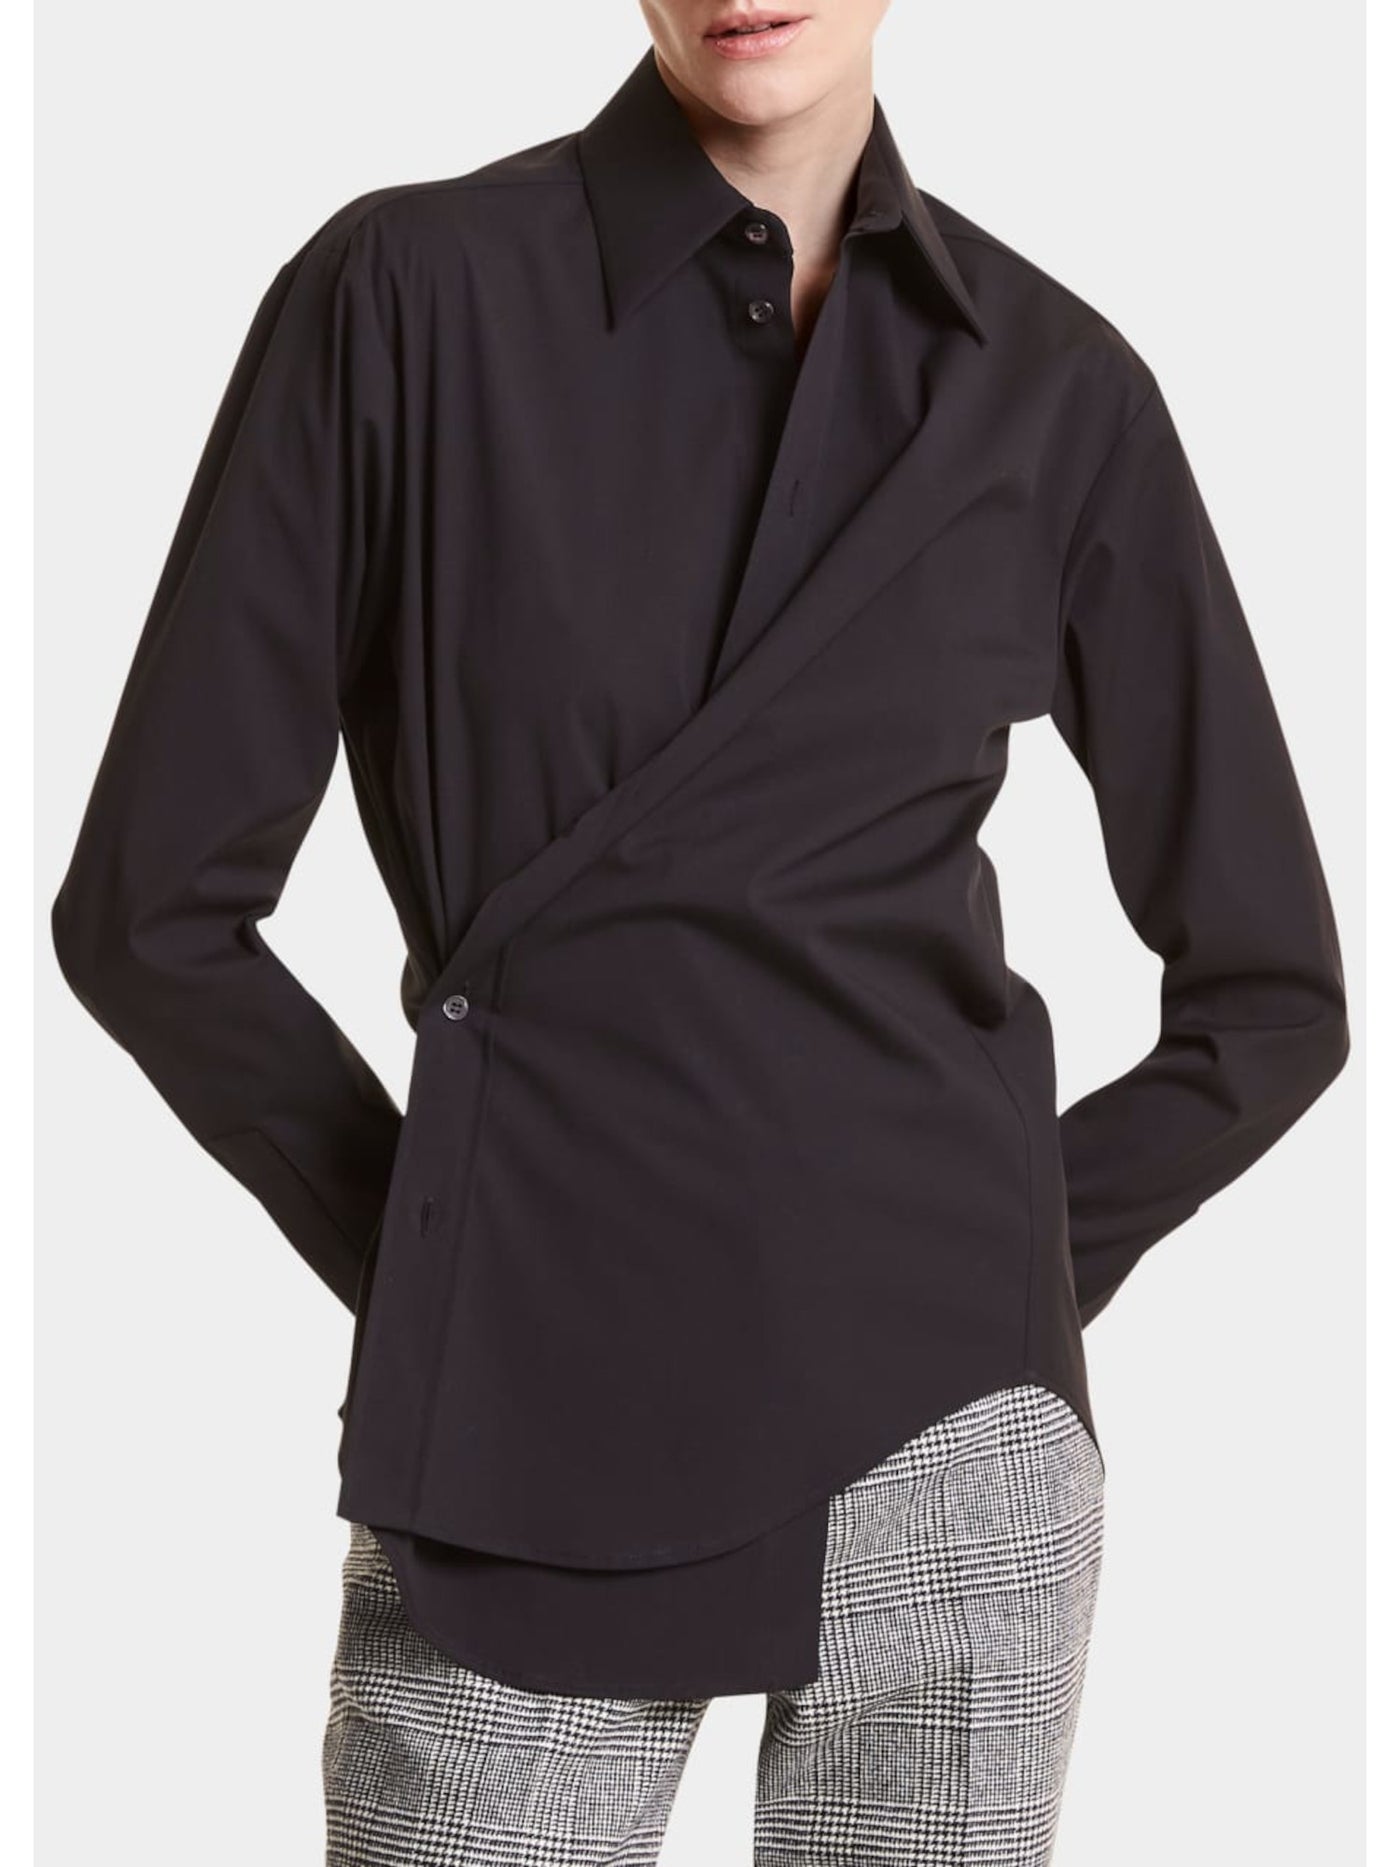 MICHAEL KORS Womens Black Sheer Unlined Side-button Convertible Cuffed Sleeve Collared Button Up Top 10